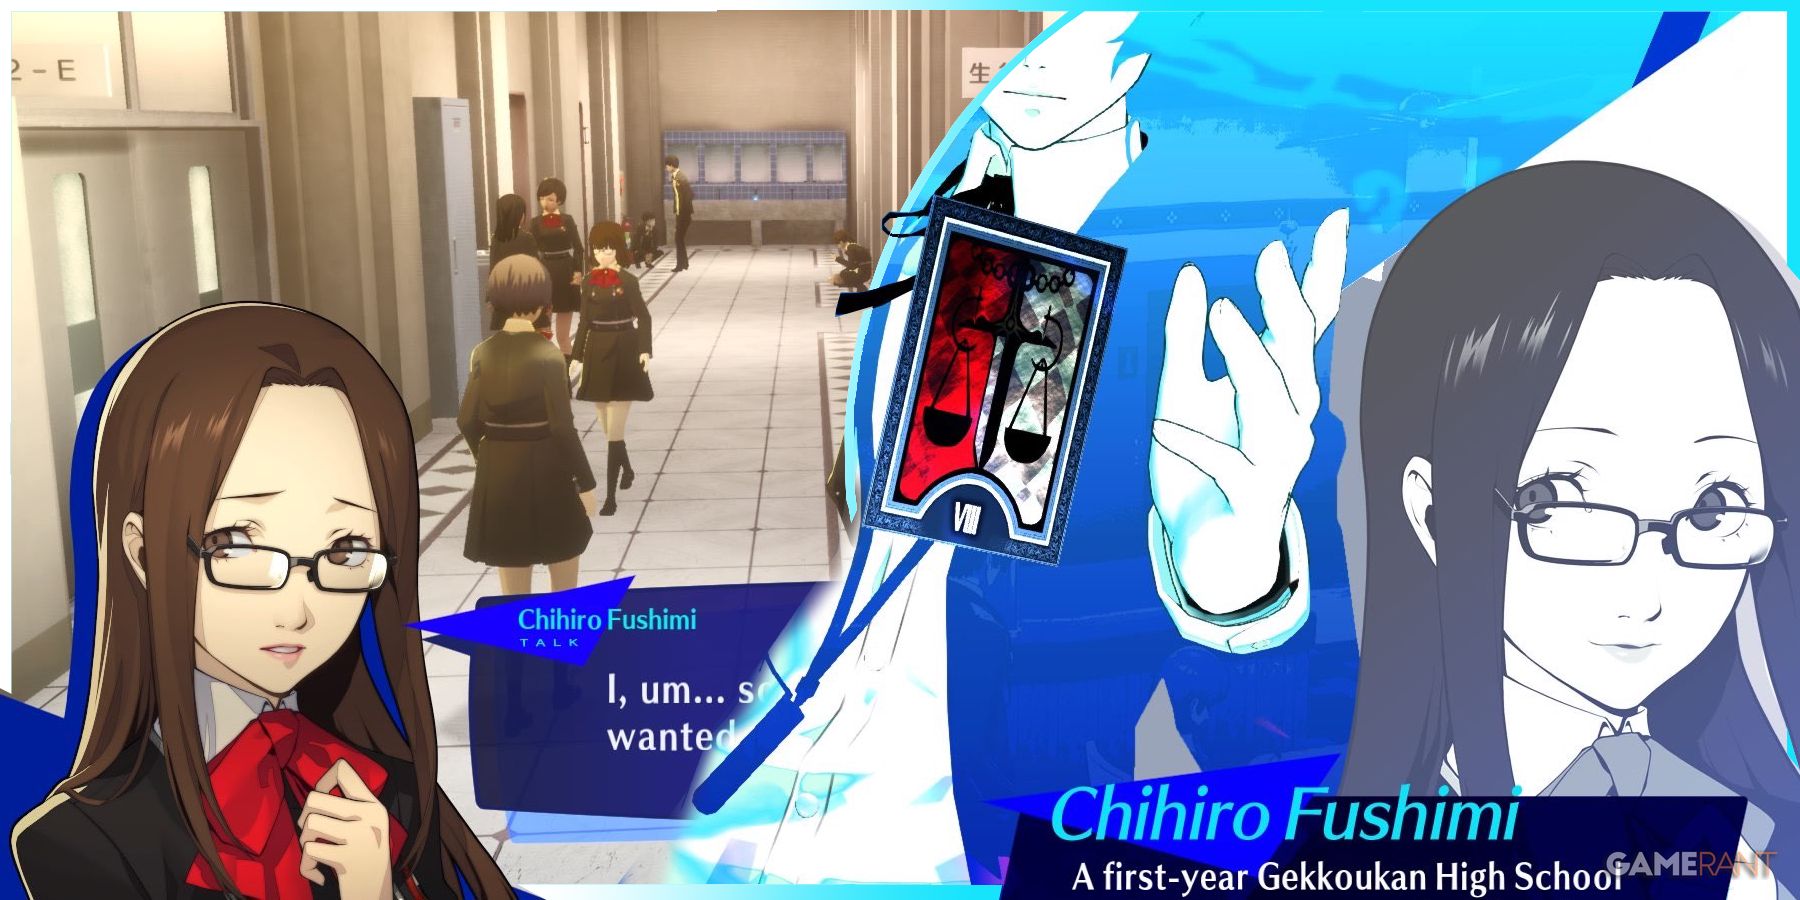 Persona 3 Reload Chihiro Fushimi Social Link Guide (Justice)